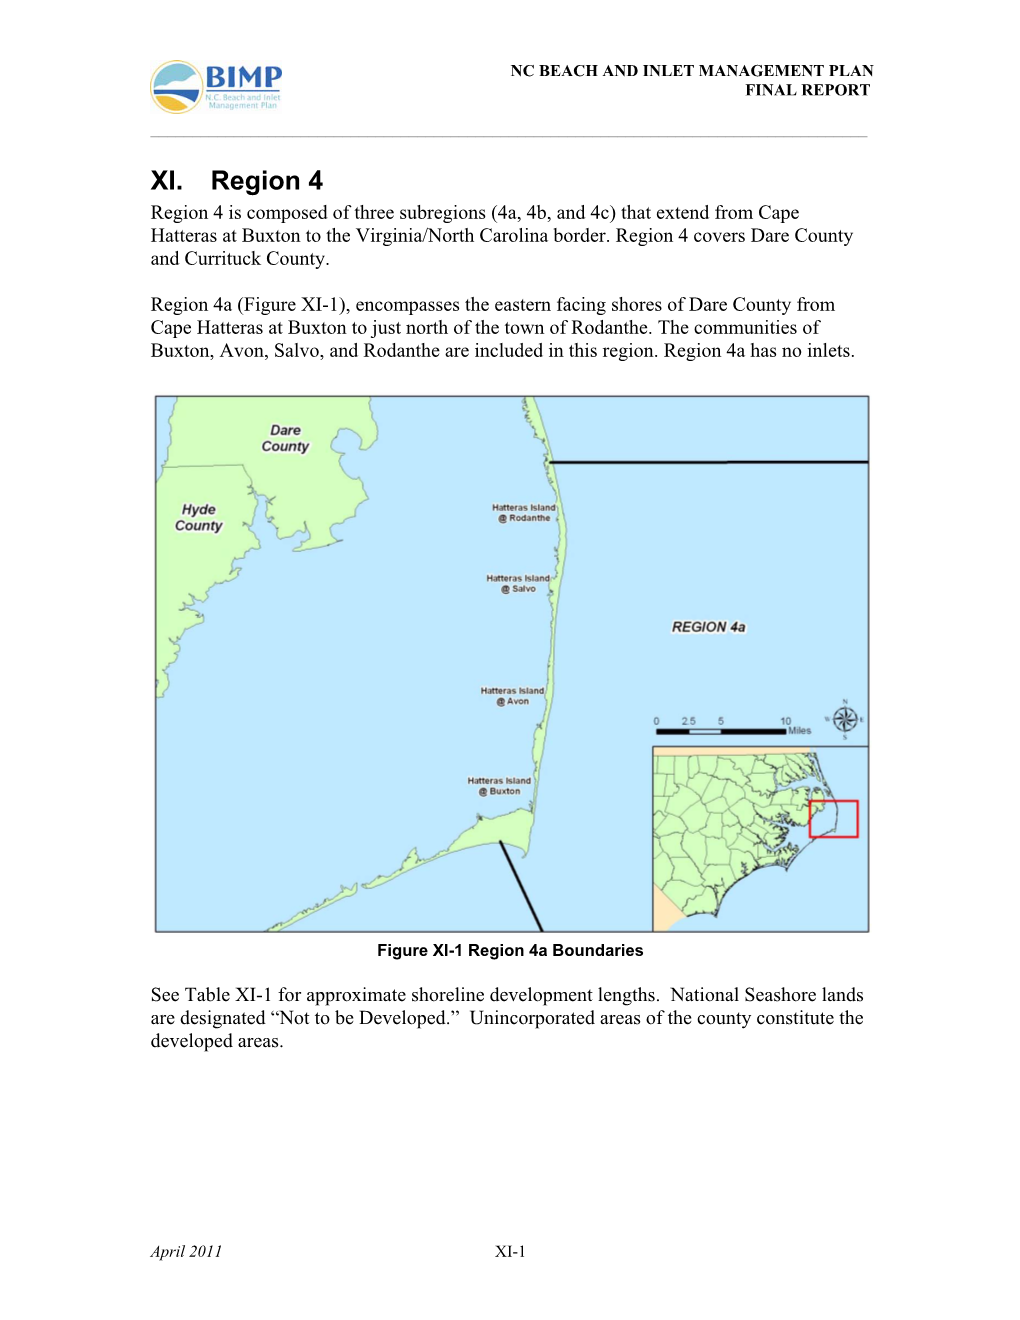 XI. Region 4 Region 4 Is Composed of Three Subregions (4A, 4B, and 4C) That Extend from Cape Hatteras at Buxton to the Virginia/North Carolina Border